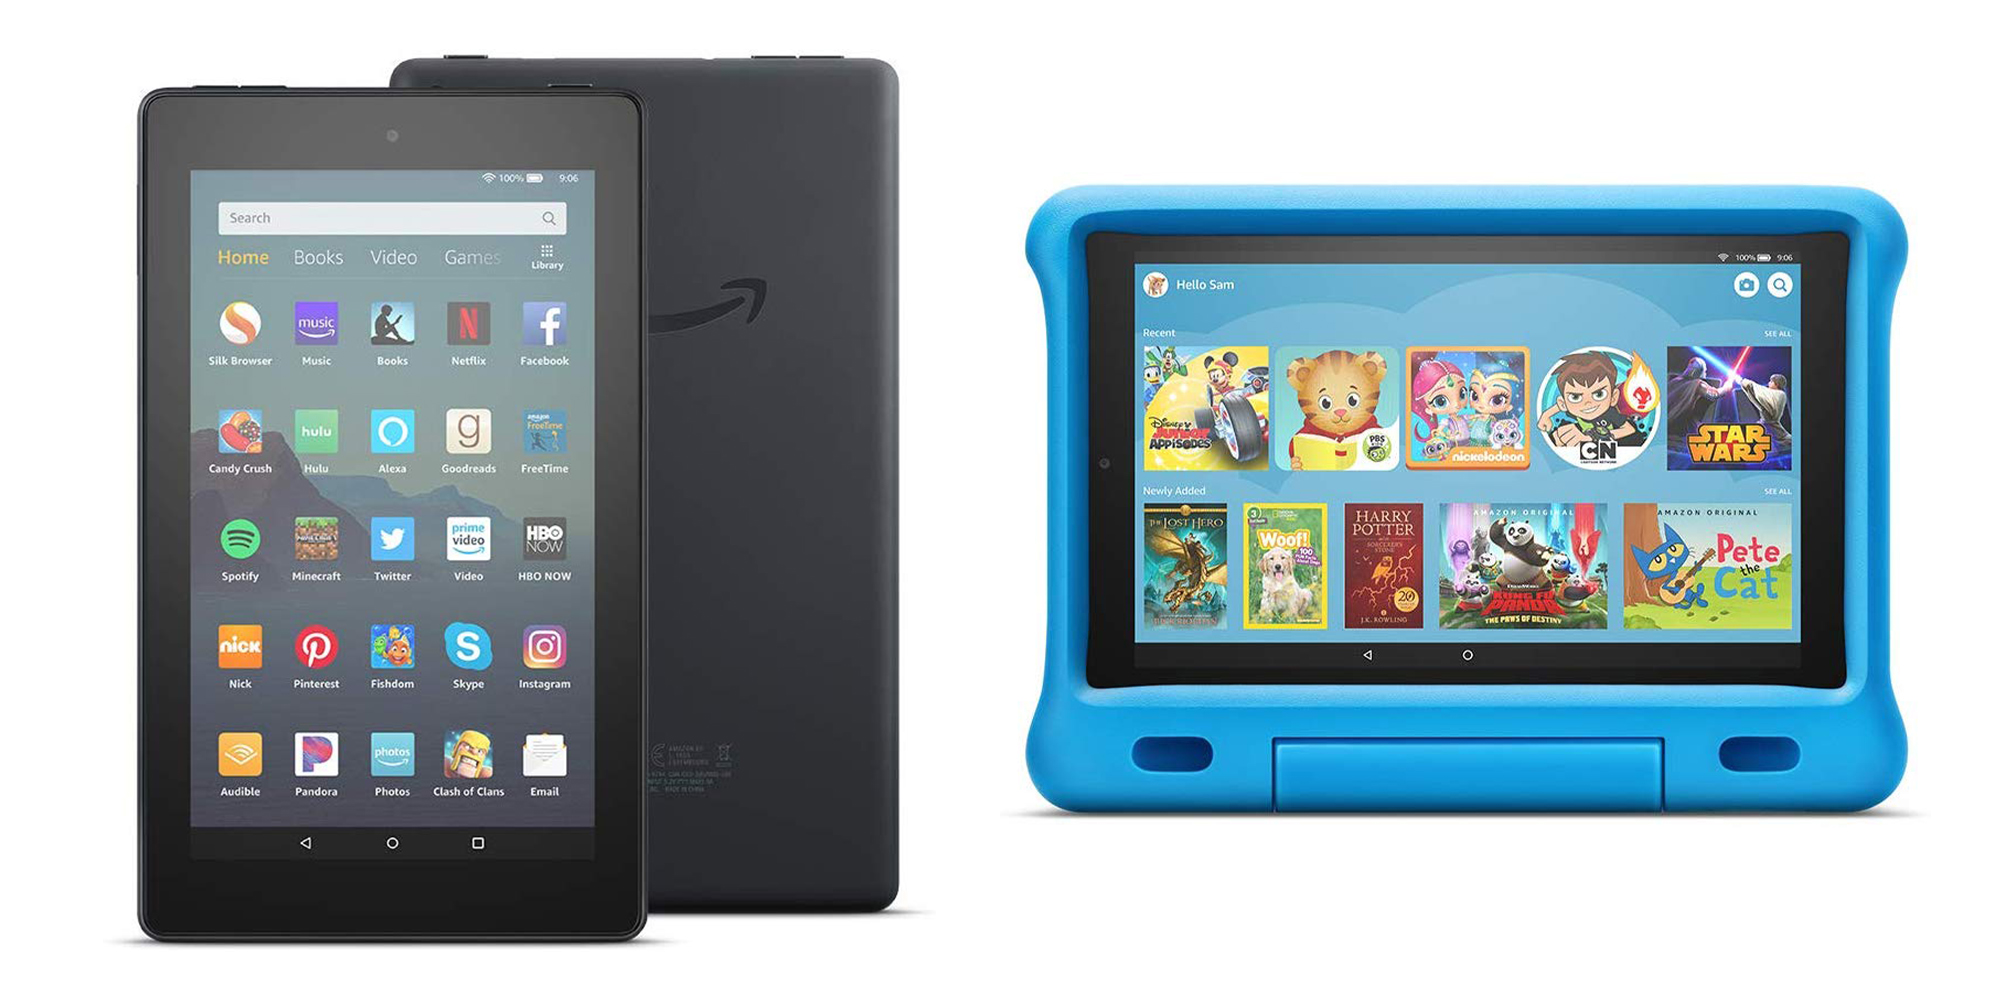 Amazon launches Black Friday deals on Fire tablets from $30, kids version starts at $60 - 9to5Toys